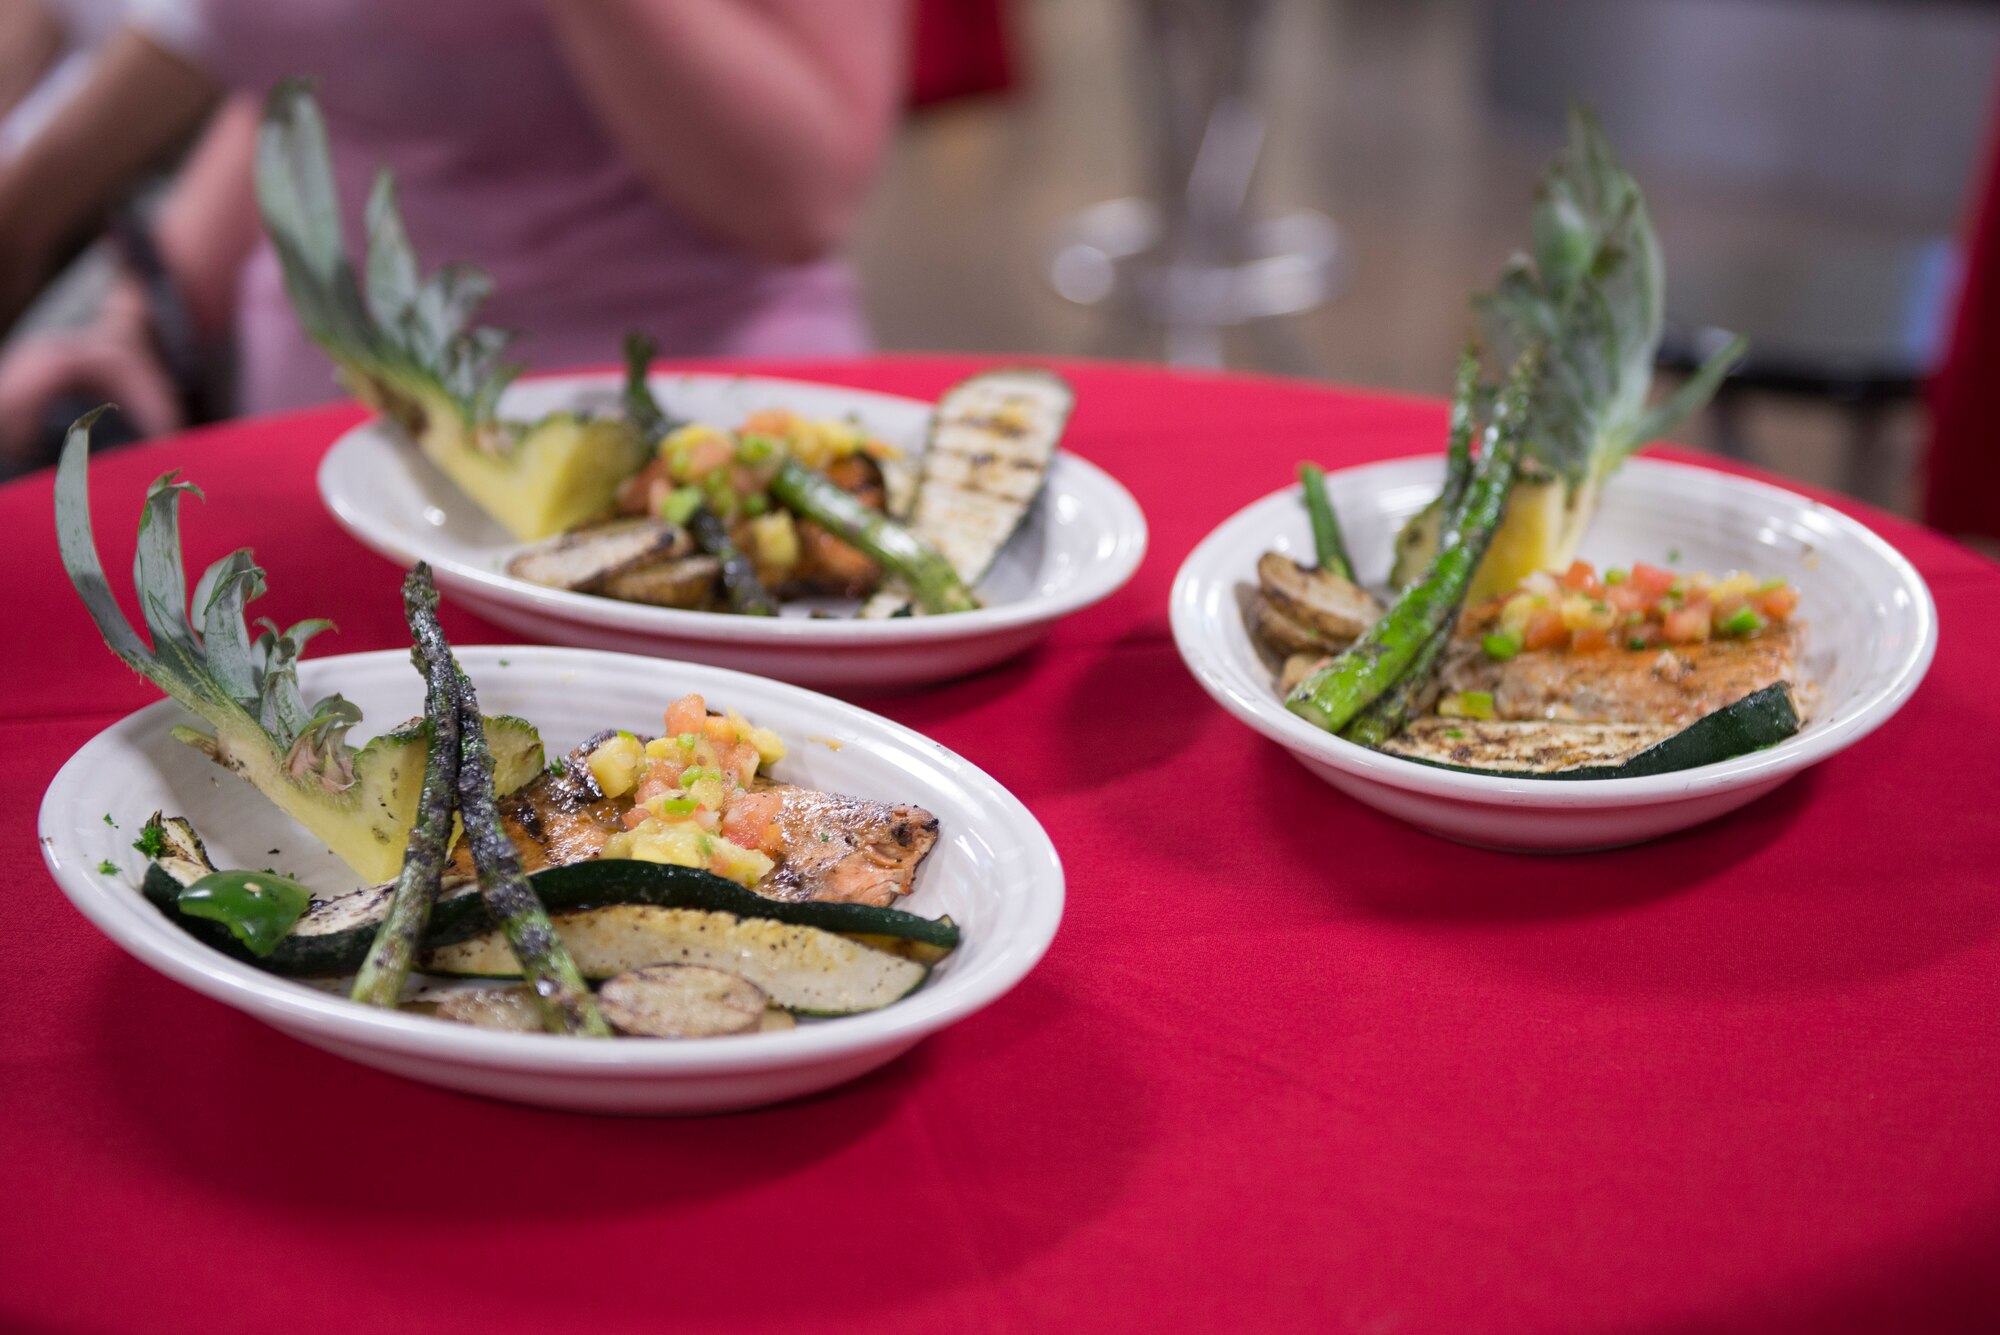 The winning meal of the 2018 Grill Masters competition - wood-fired grilled salmon with pineapple salsa, asparagus and vegetables – sits on display prior to judging at Luke Air Force Base, Ariz., Feb. 23, 2018. Each team was required to incorporate a secret ingredient, in this case pineapple, into a meal consisting of one meat and two sides. (U.S. Air Force photo/Senior Airman Ridge Shan)